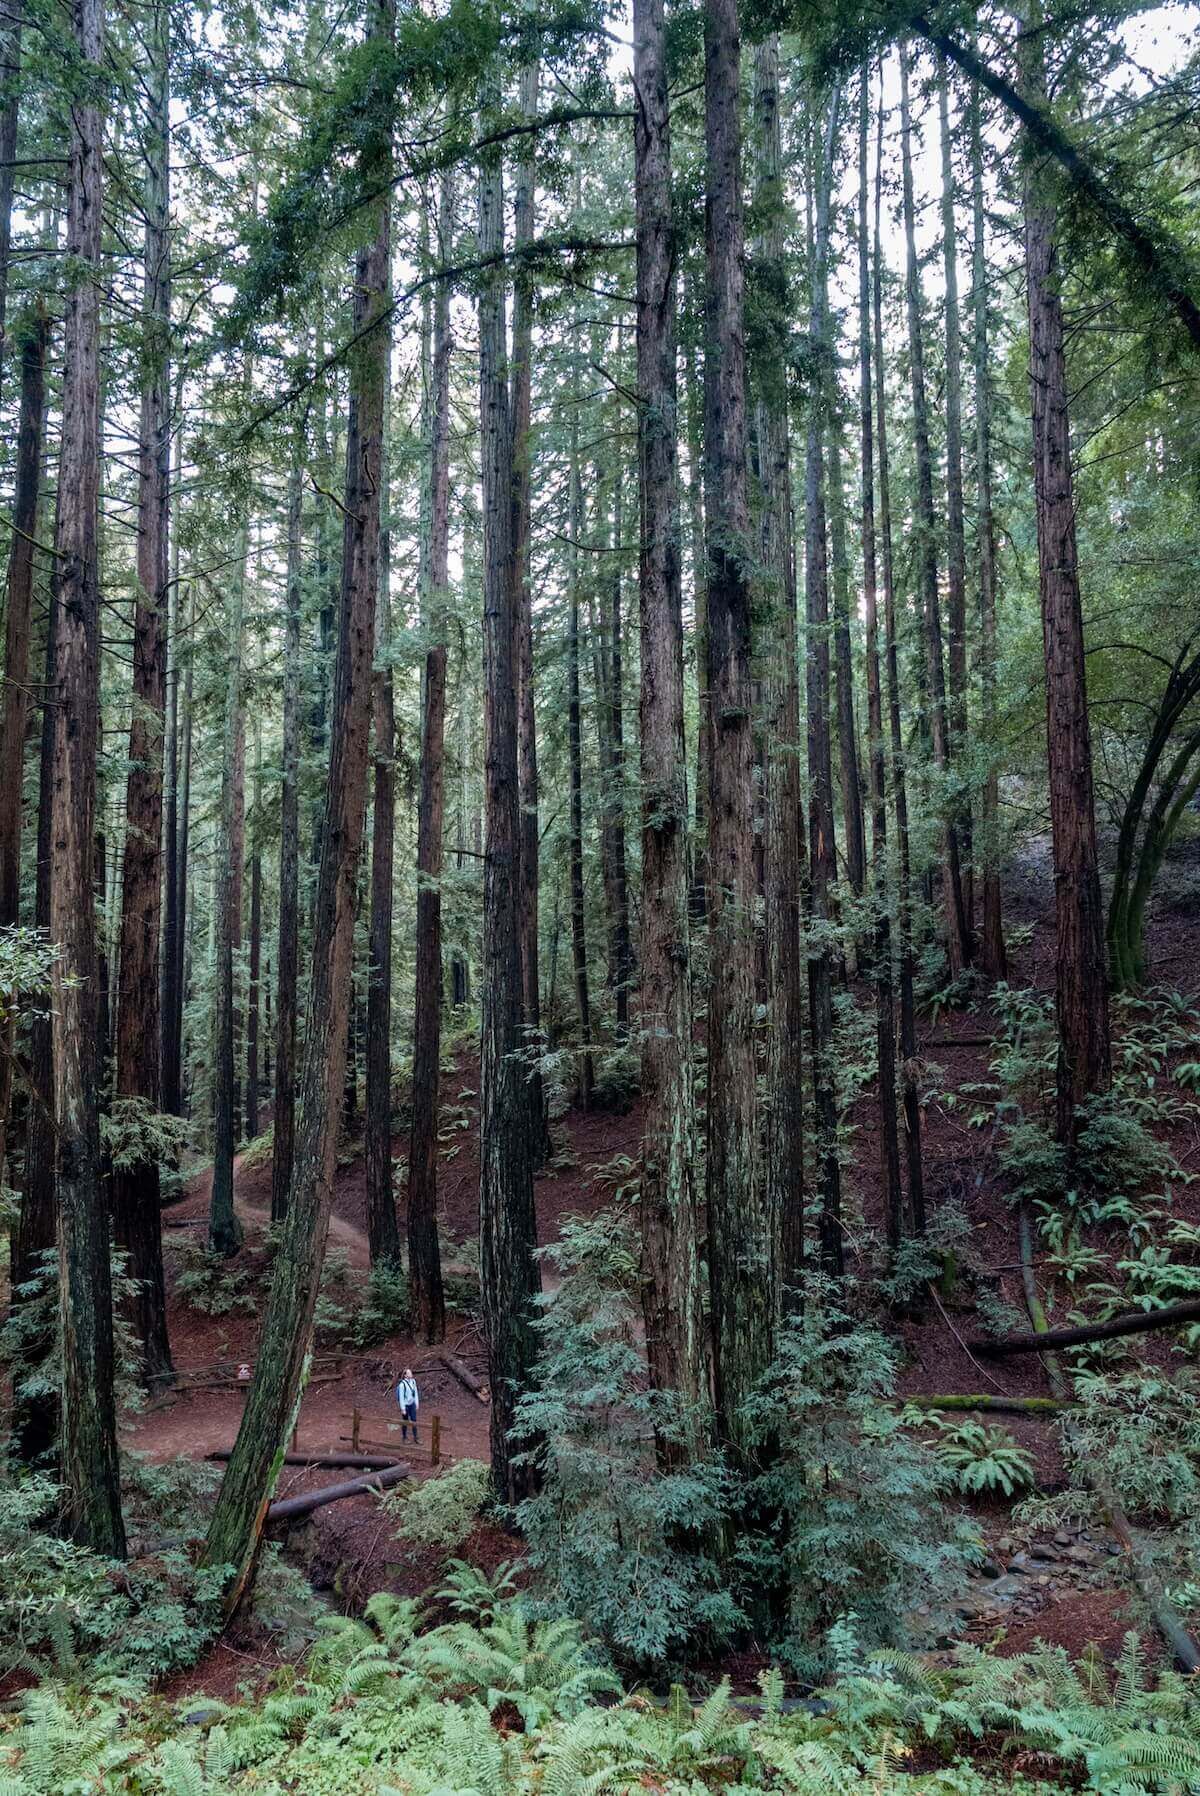 A view of a redwood forest with the tiny, faraway figure of a female hiker visible through the trees.